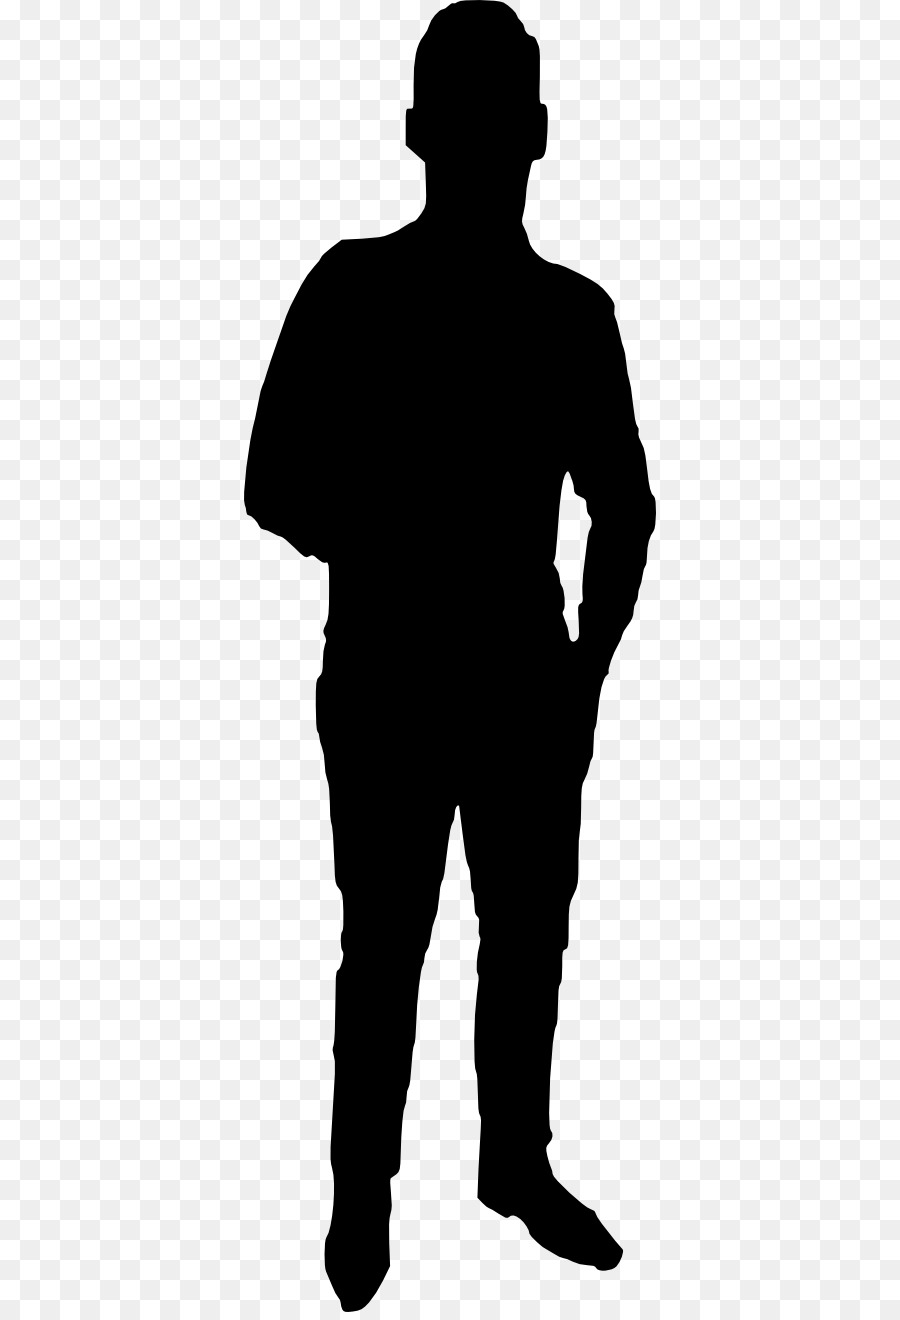 Free Person Silhouette Png, Download Free Person Silhouette Png png ...